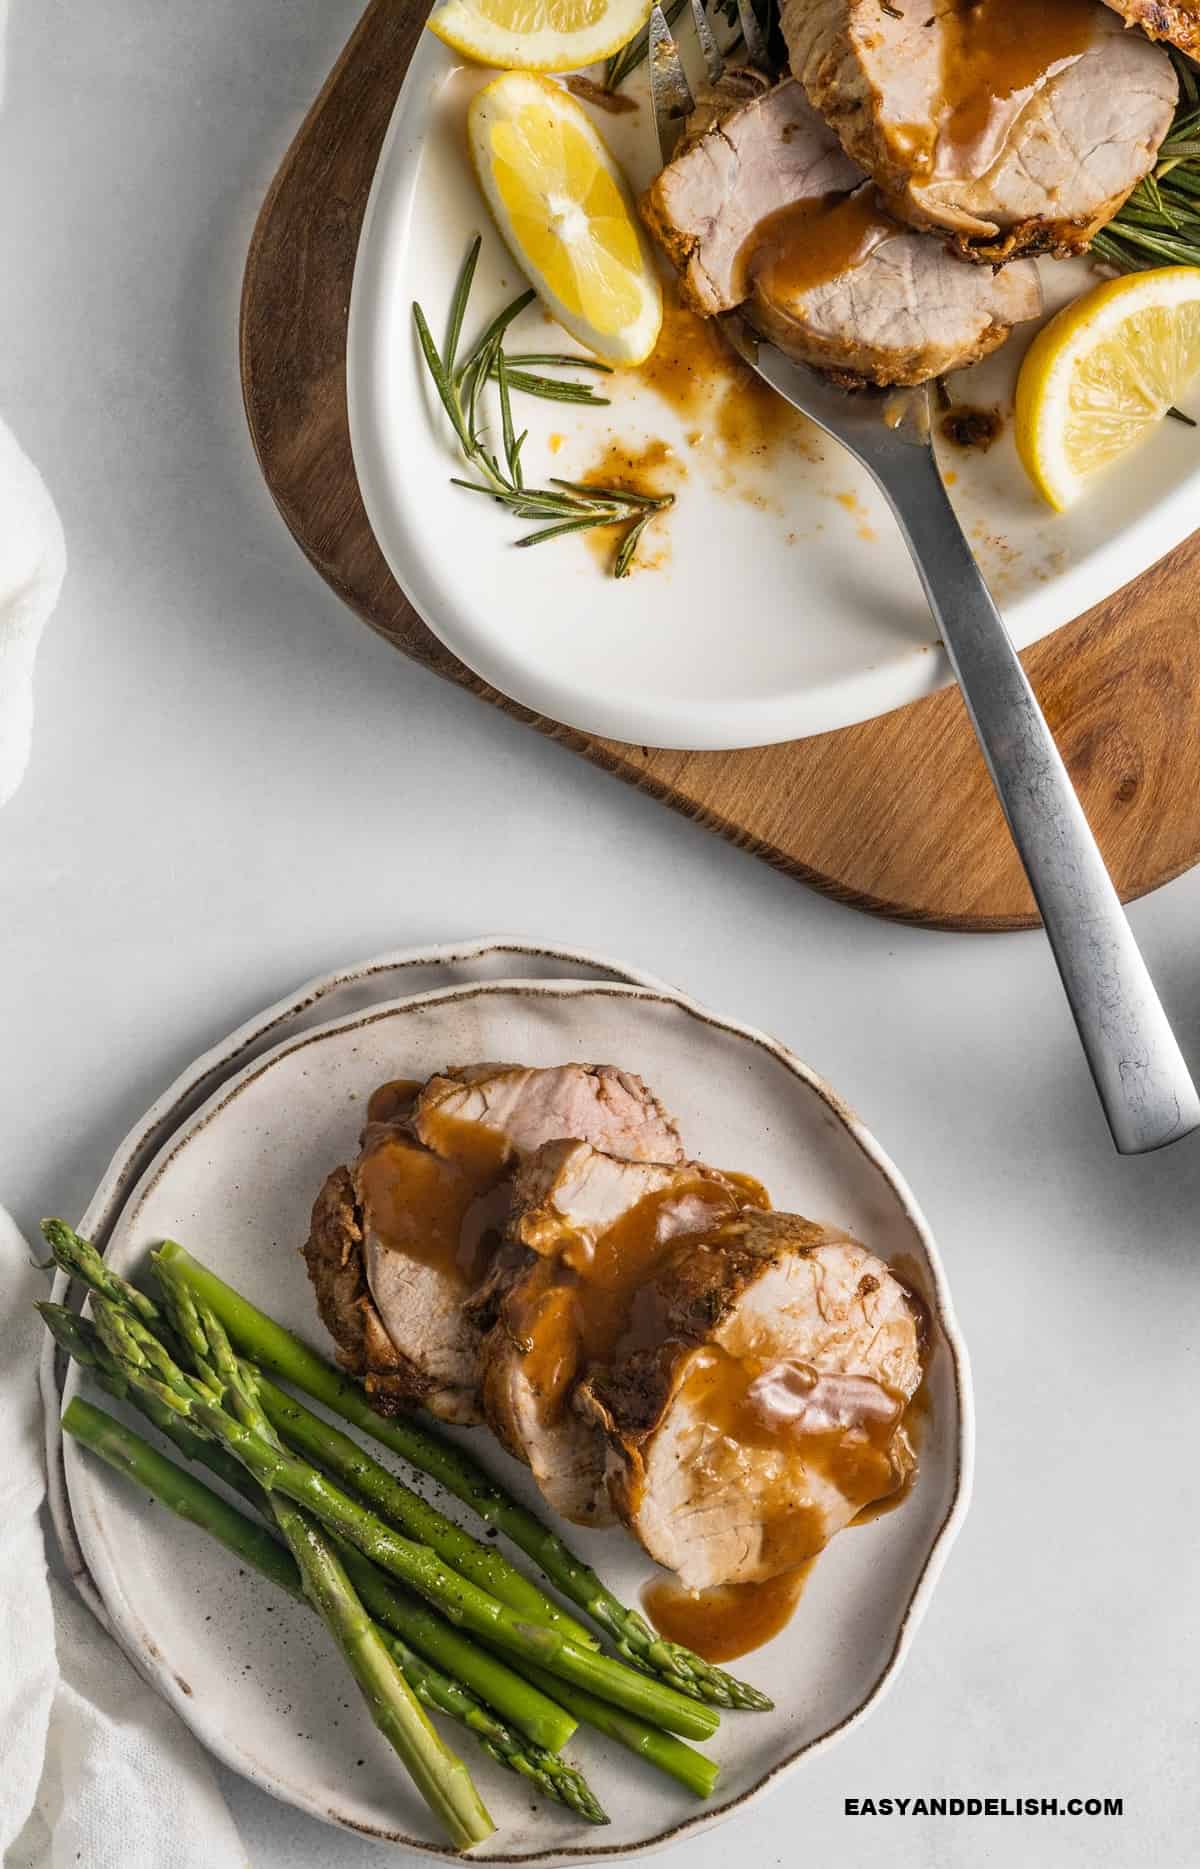 sliced pork tenderloin with wine sauce ina  plate served with asparagus and a platter on teh background.